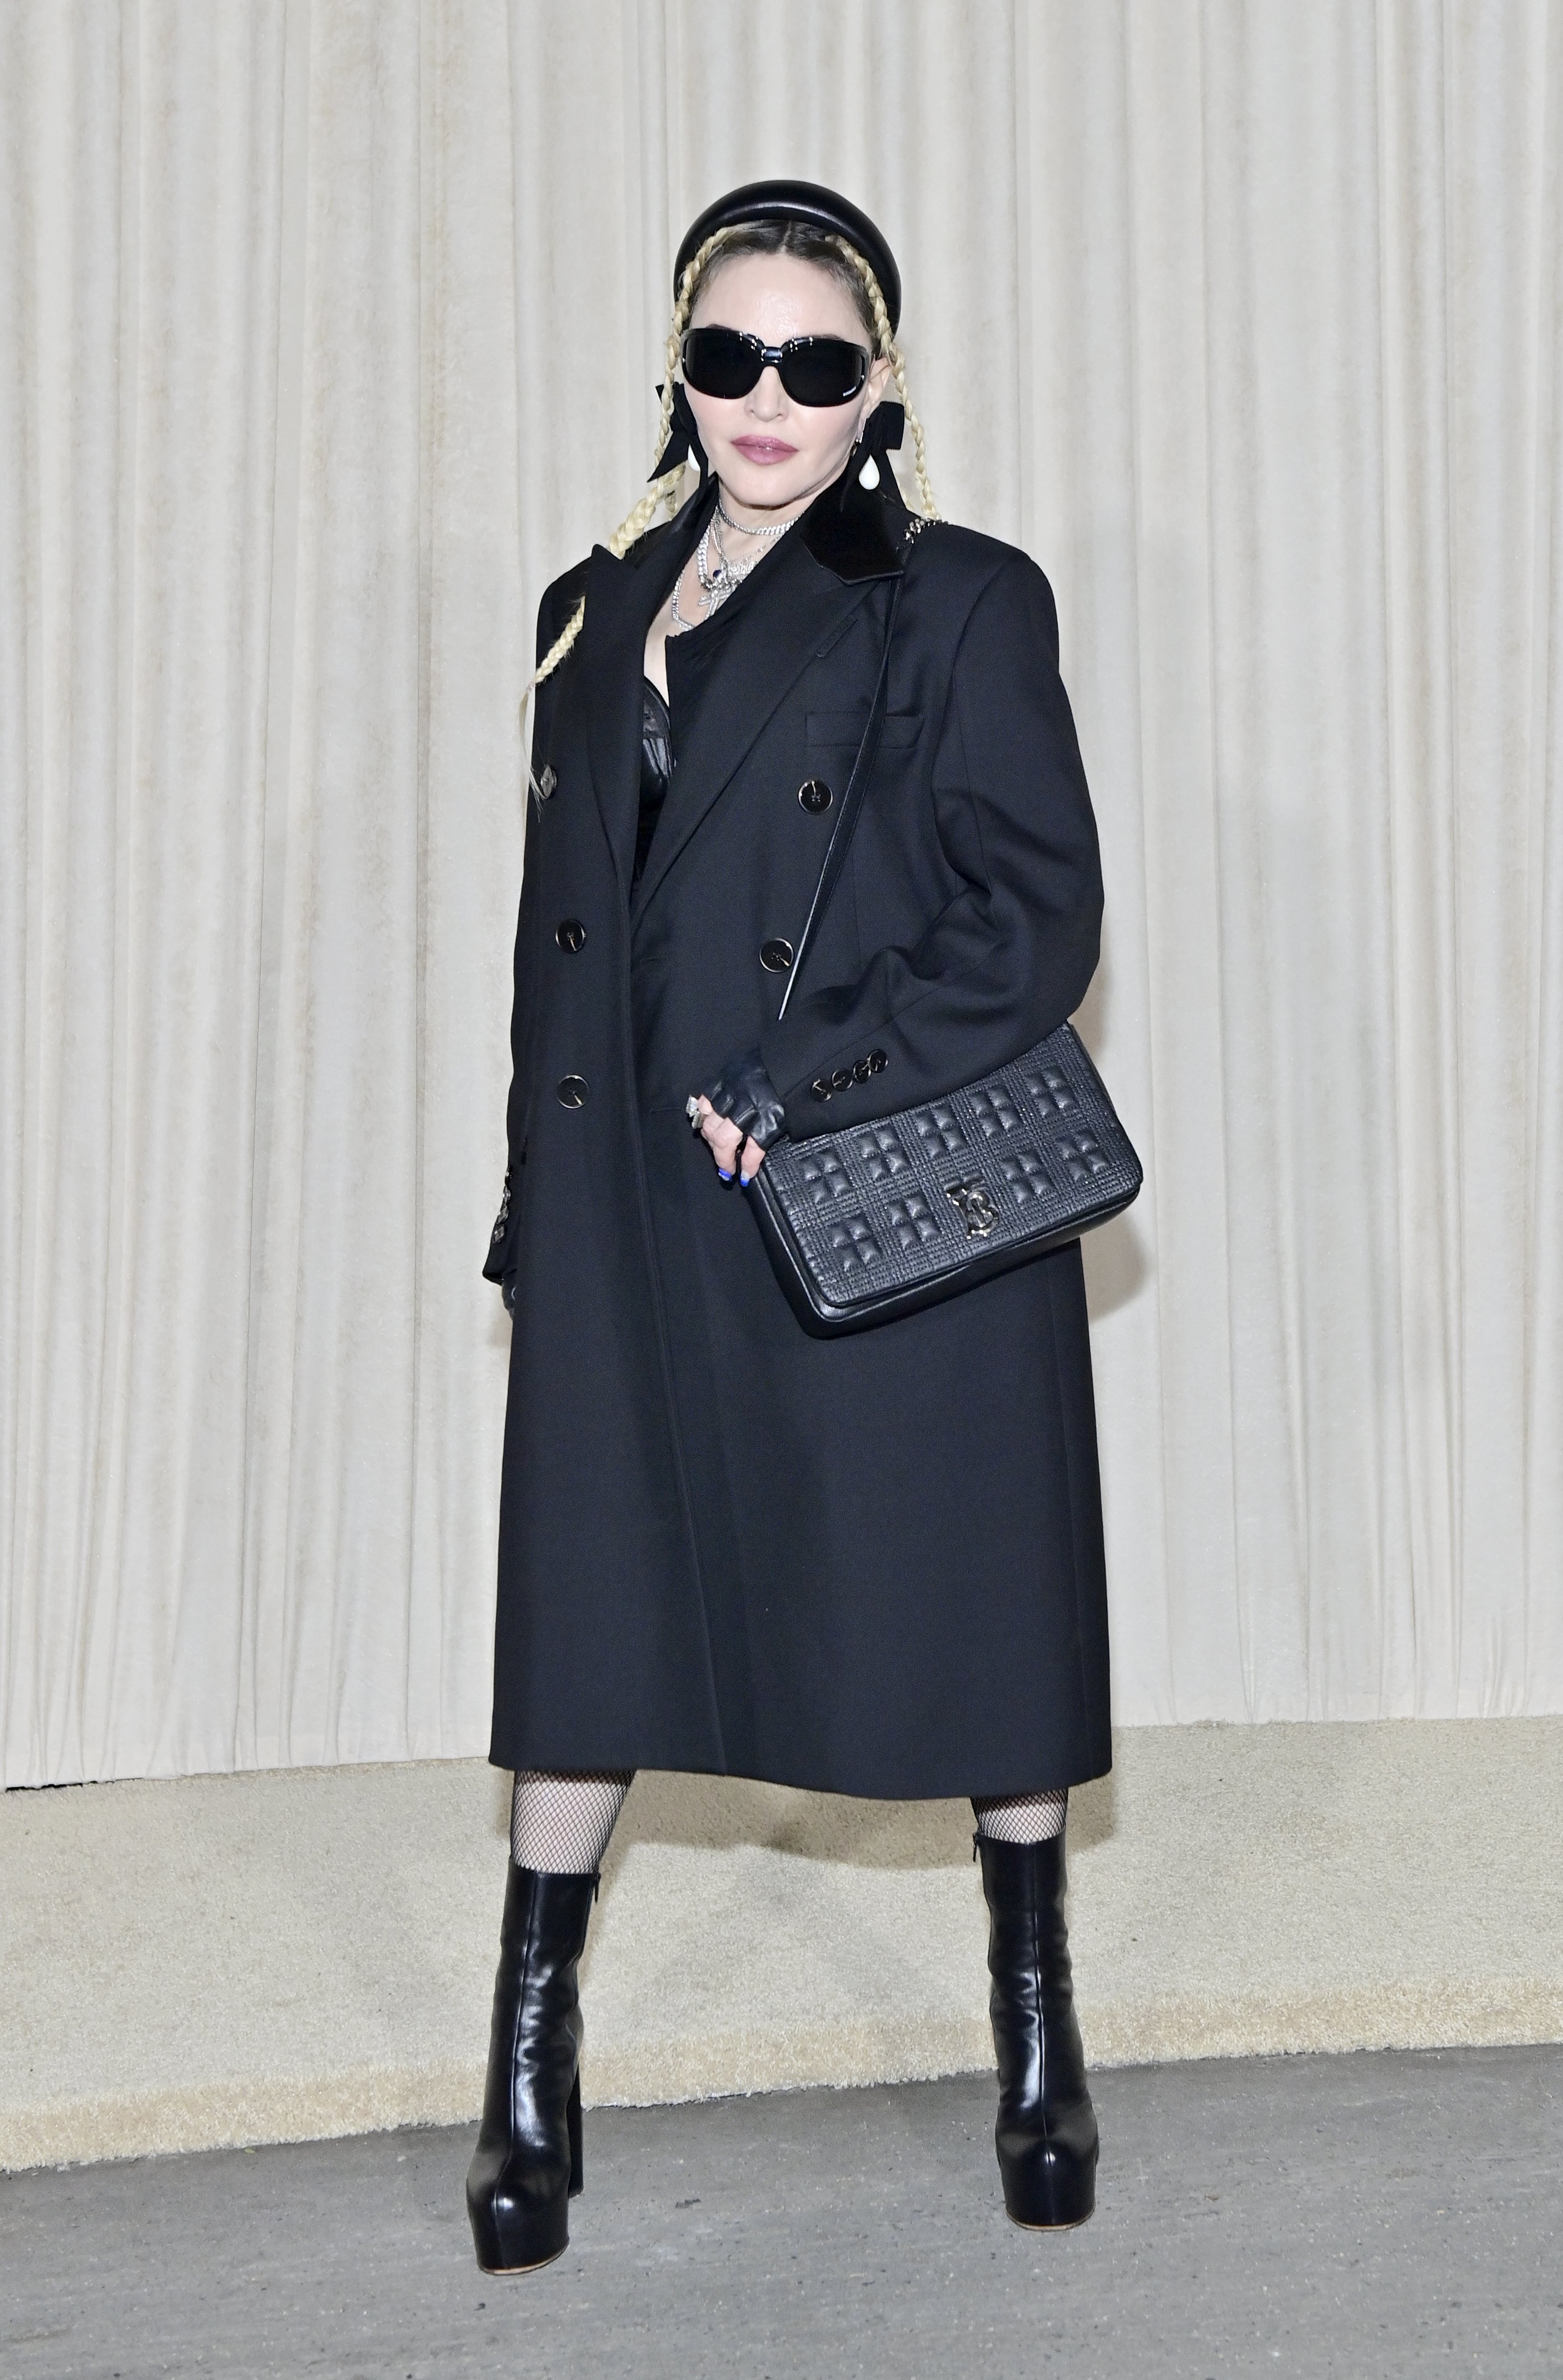 Madonna is pictured at the celebration of the Lola bag, hosted by Burberry & Riccardo Tisci on April 20, 2022, in Los Angeles, California | Source: Getty Images